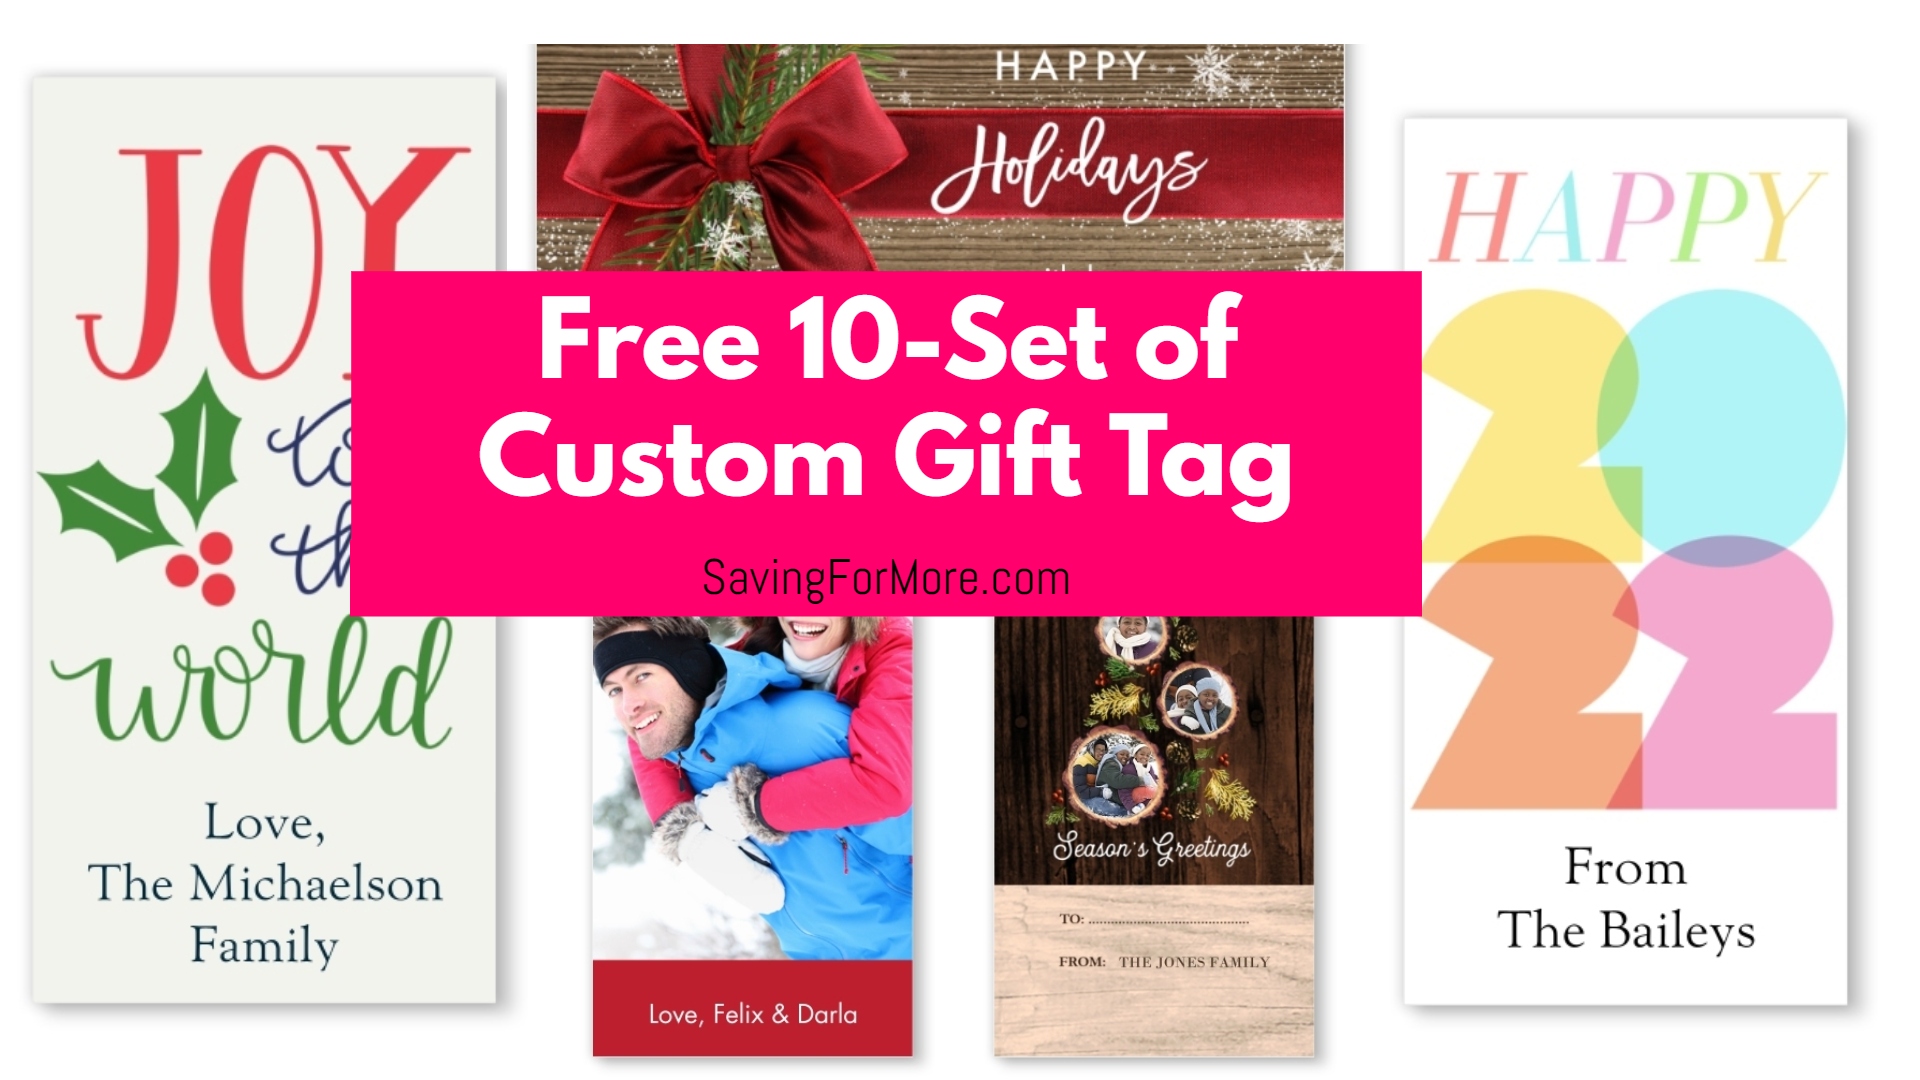 10 Free Personalized Gift Tags at Walgreens